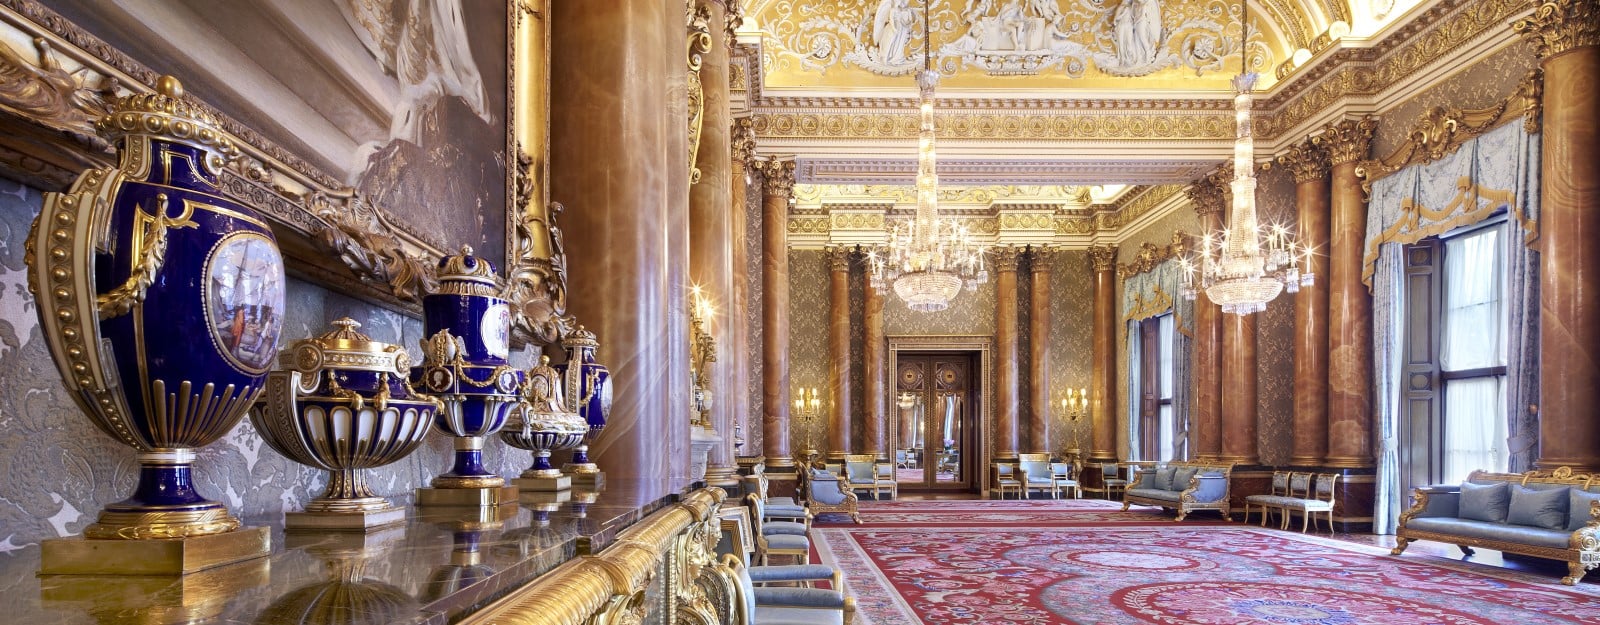 For the First Time in History, the Queen's Buckingham Palace